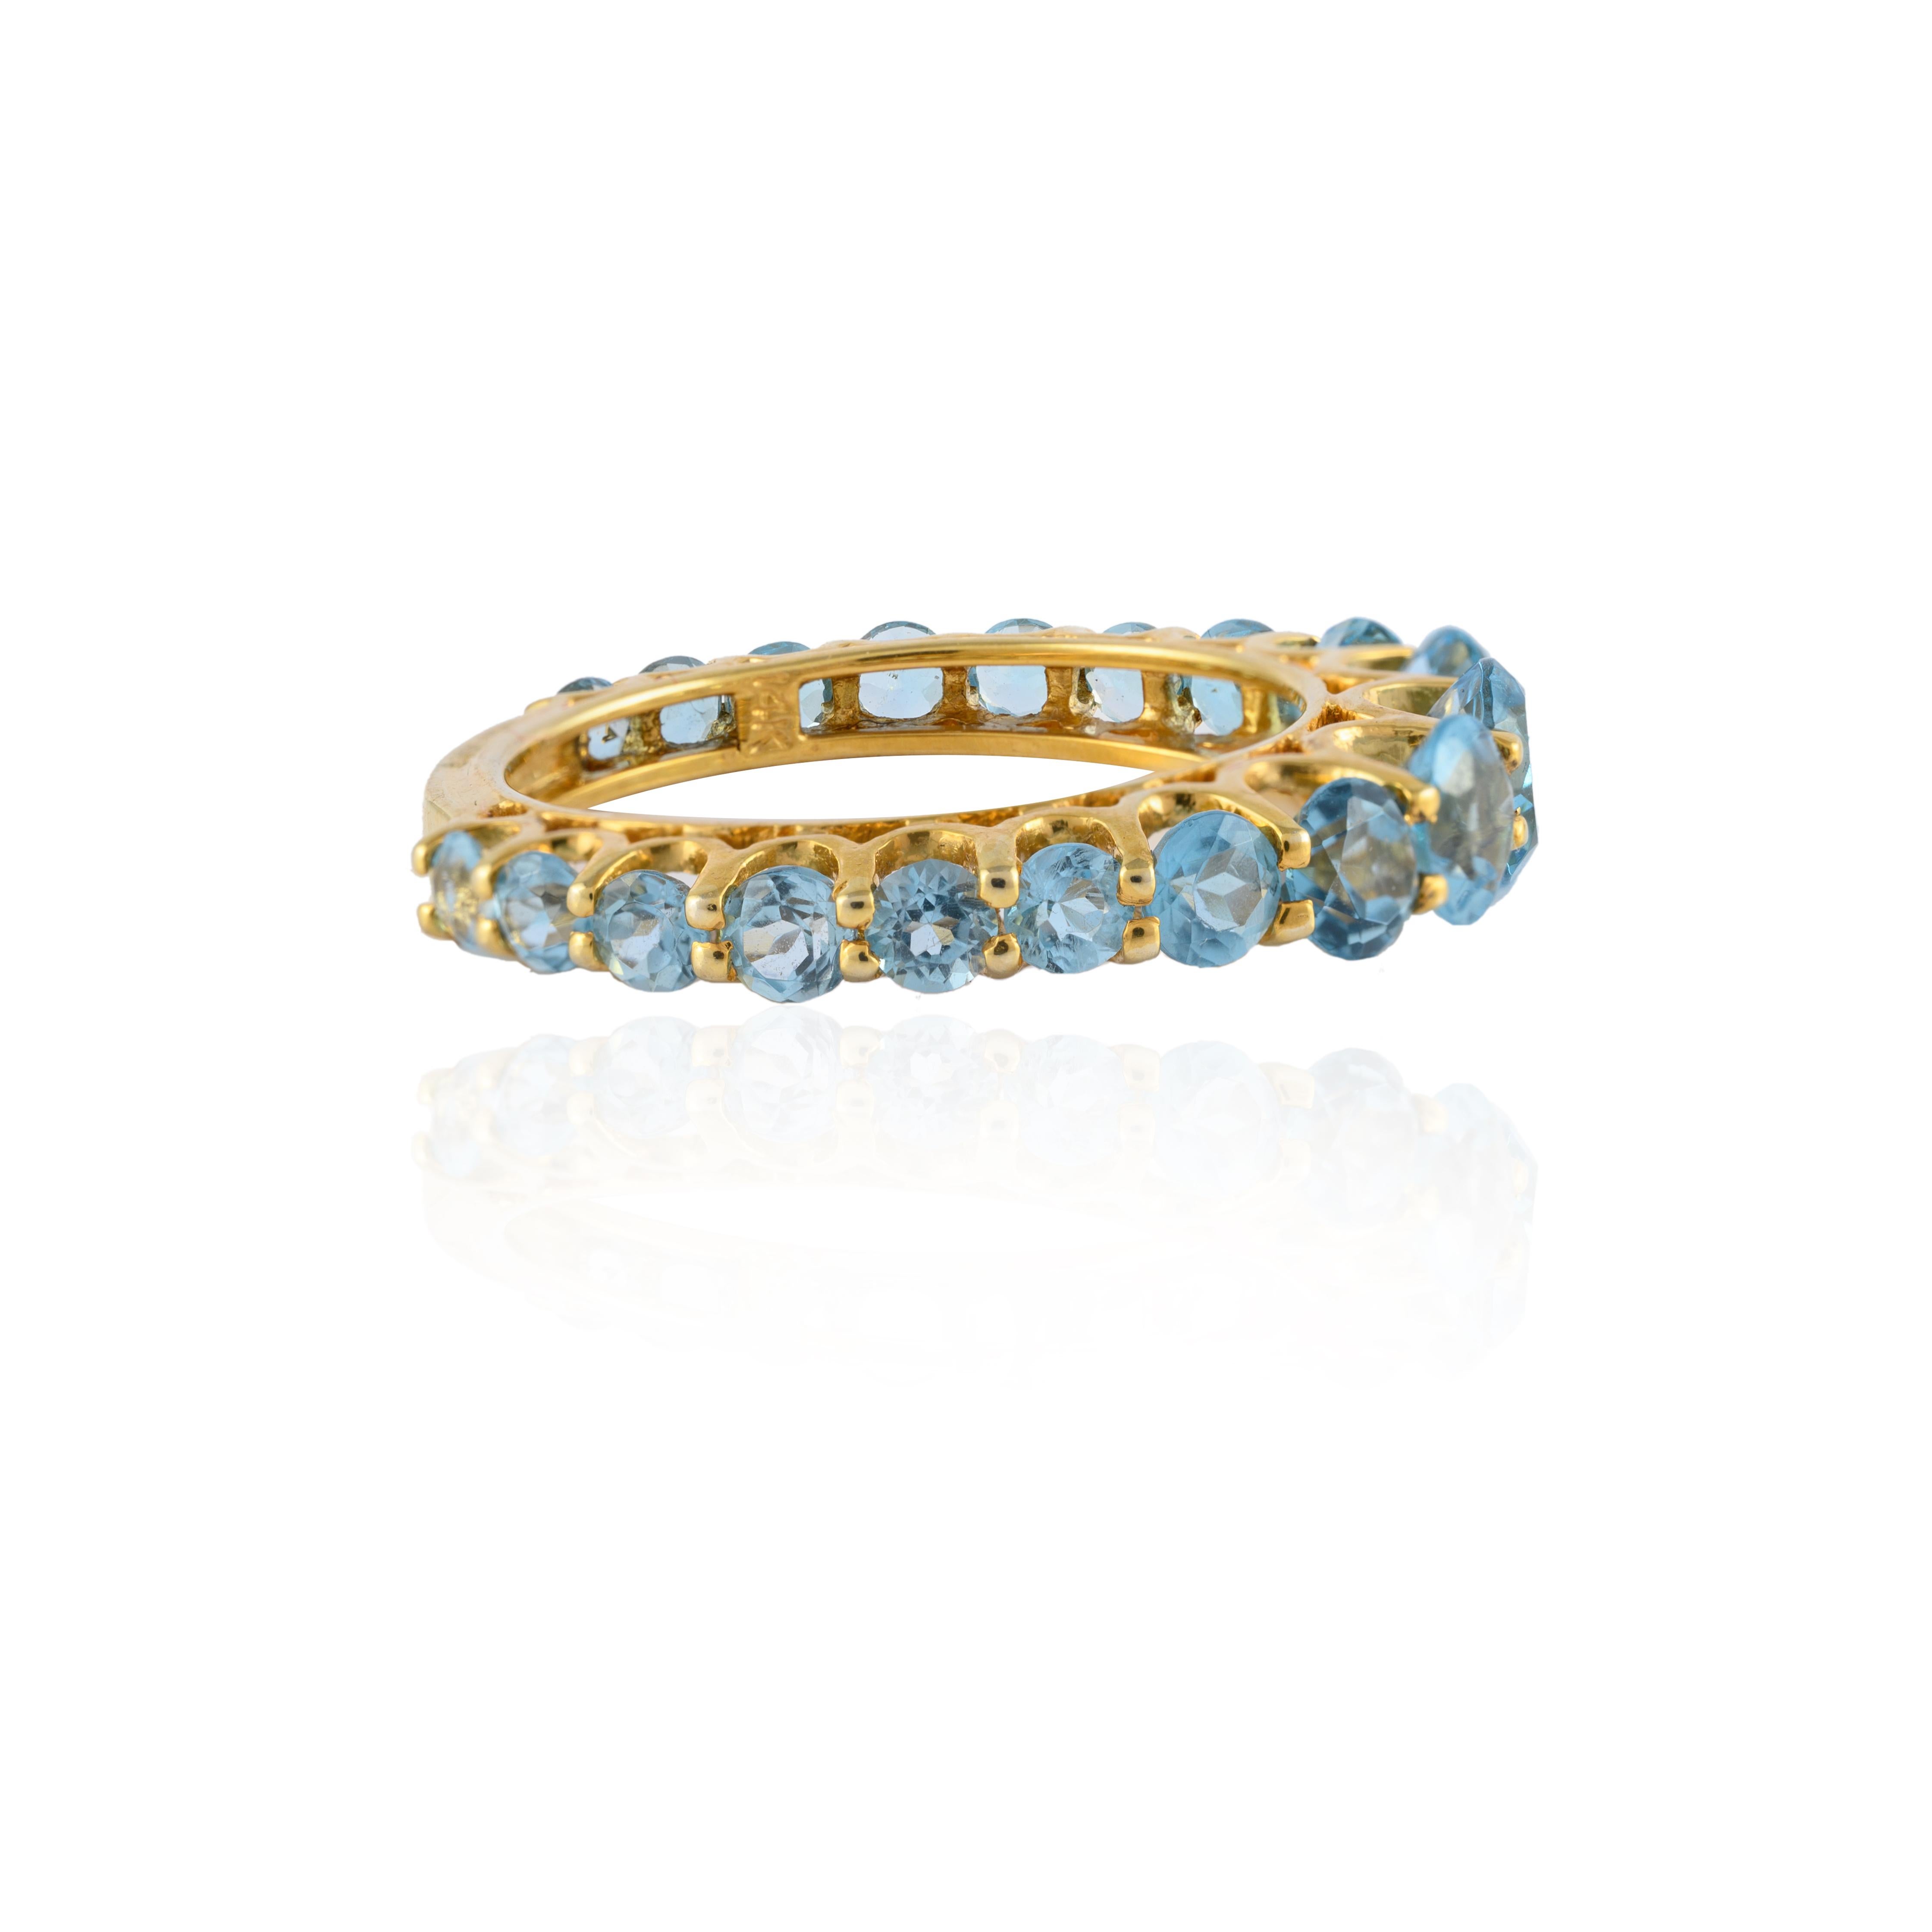 For Sale:  Unique 14k Yellow Gold 3.09 Carat Blue Topaz Half Eternity Band Ring 3